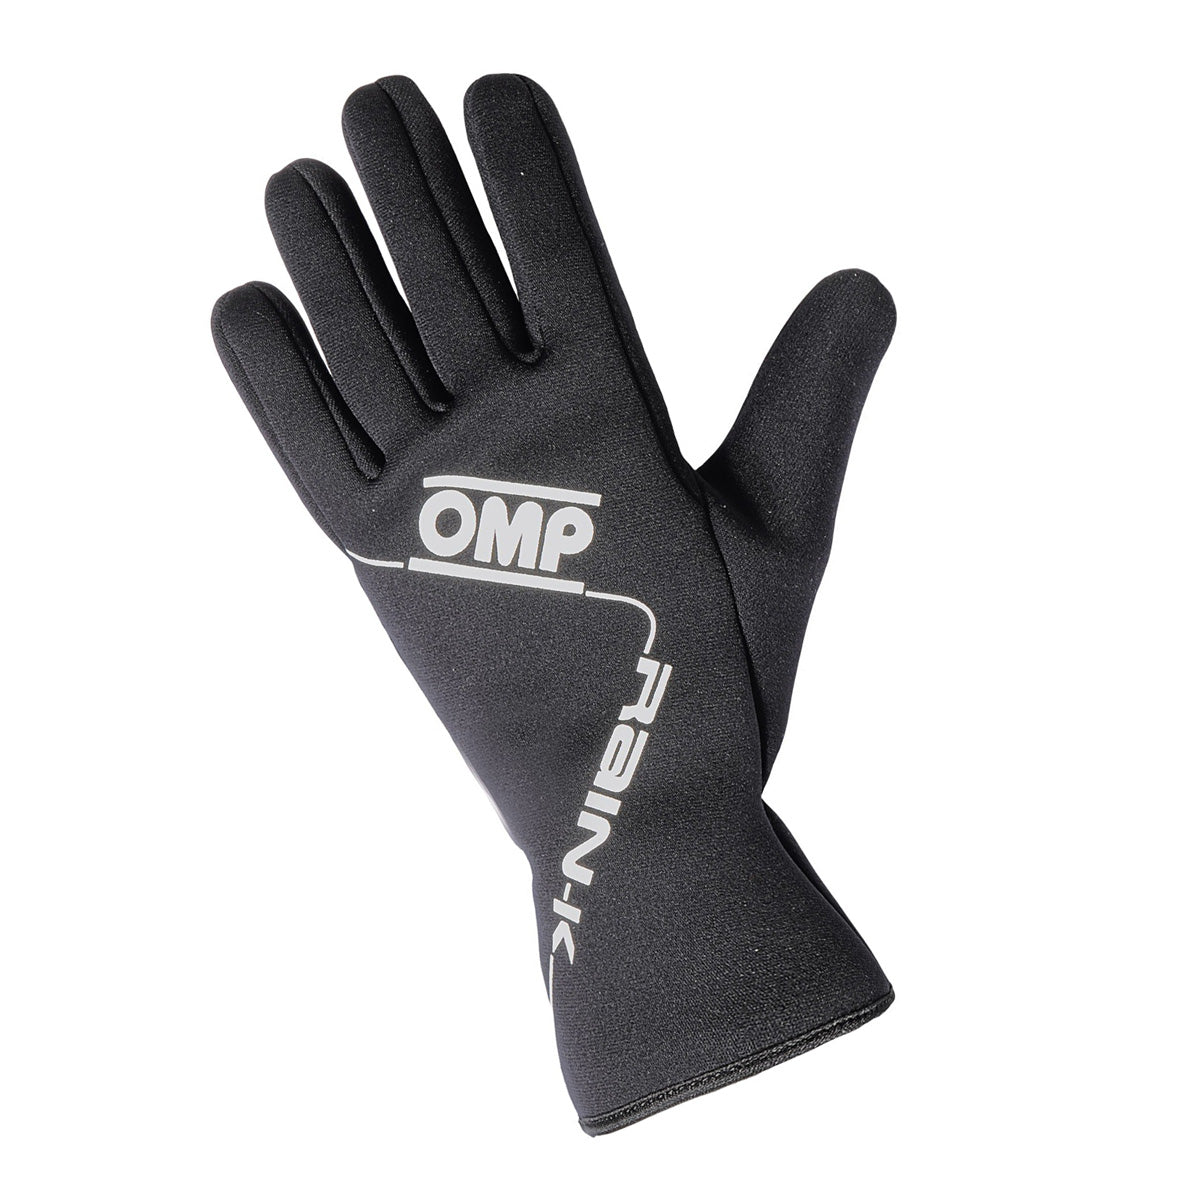 OMP Rain K All-Conditions Karting Gloves